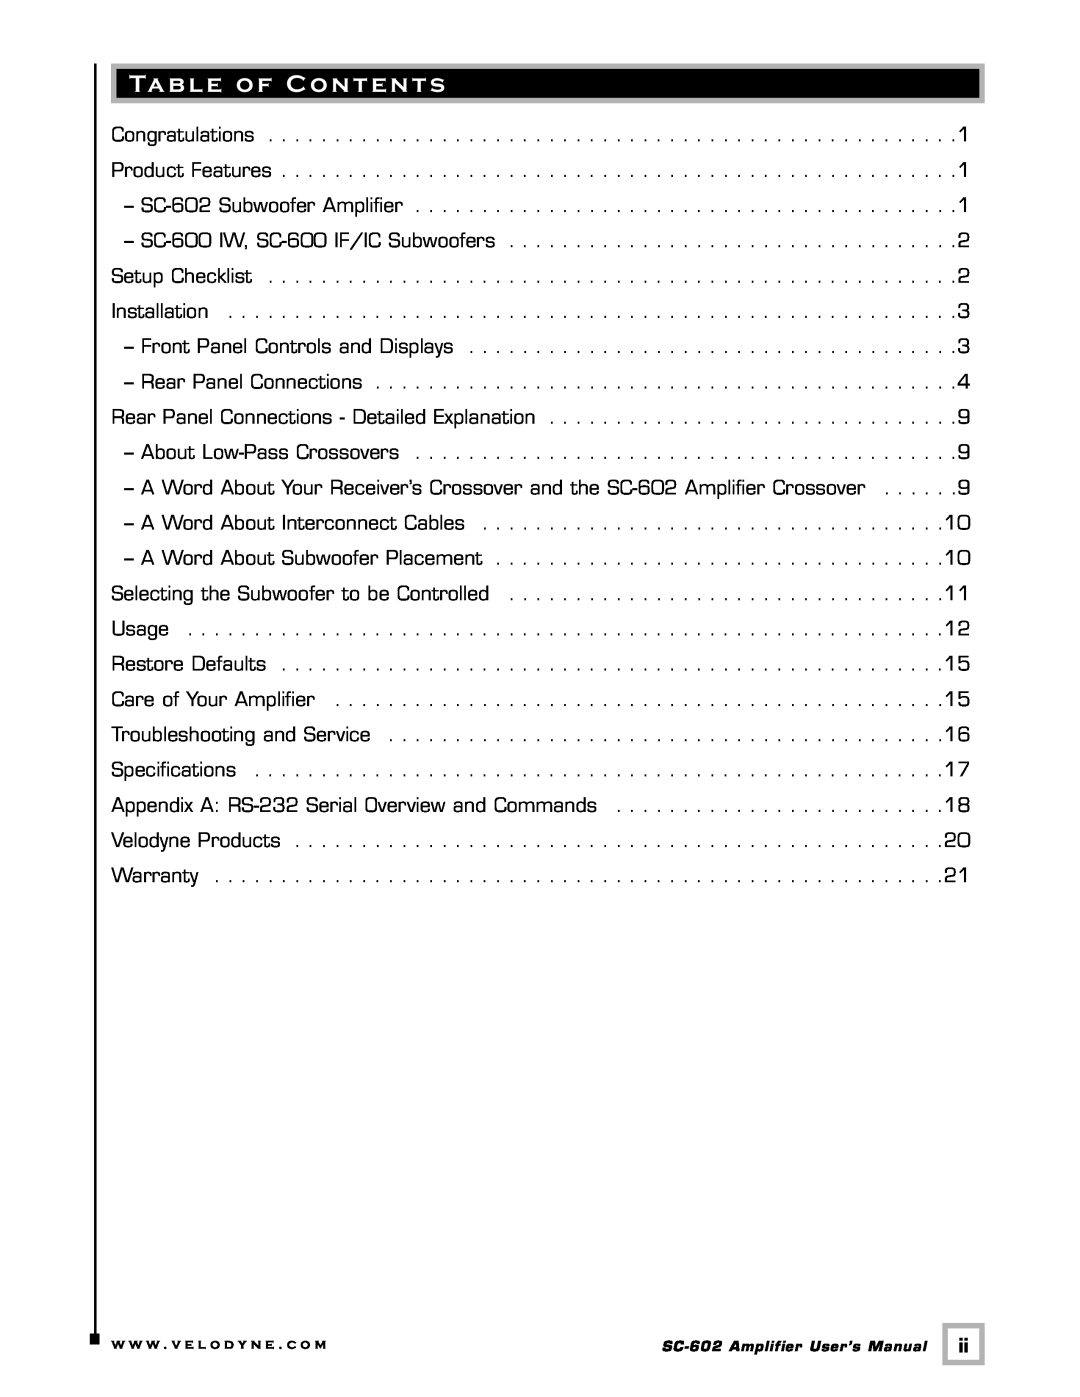 Velodyne Acoustics SC-602 user manual Table of Contents 